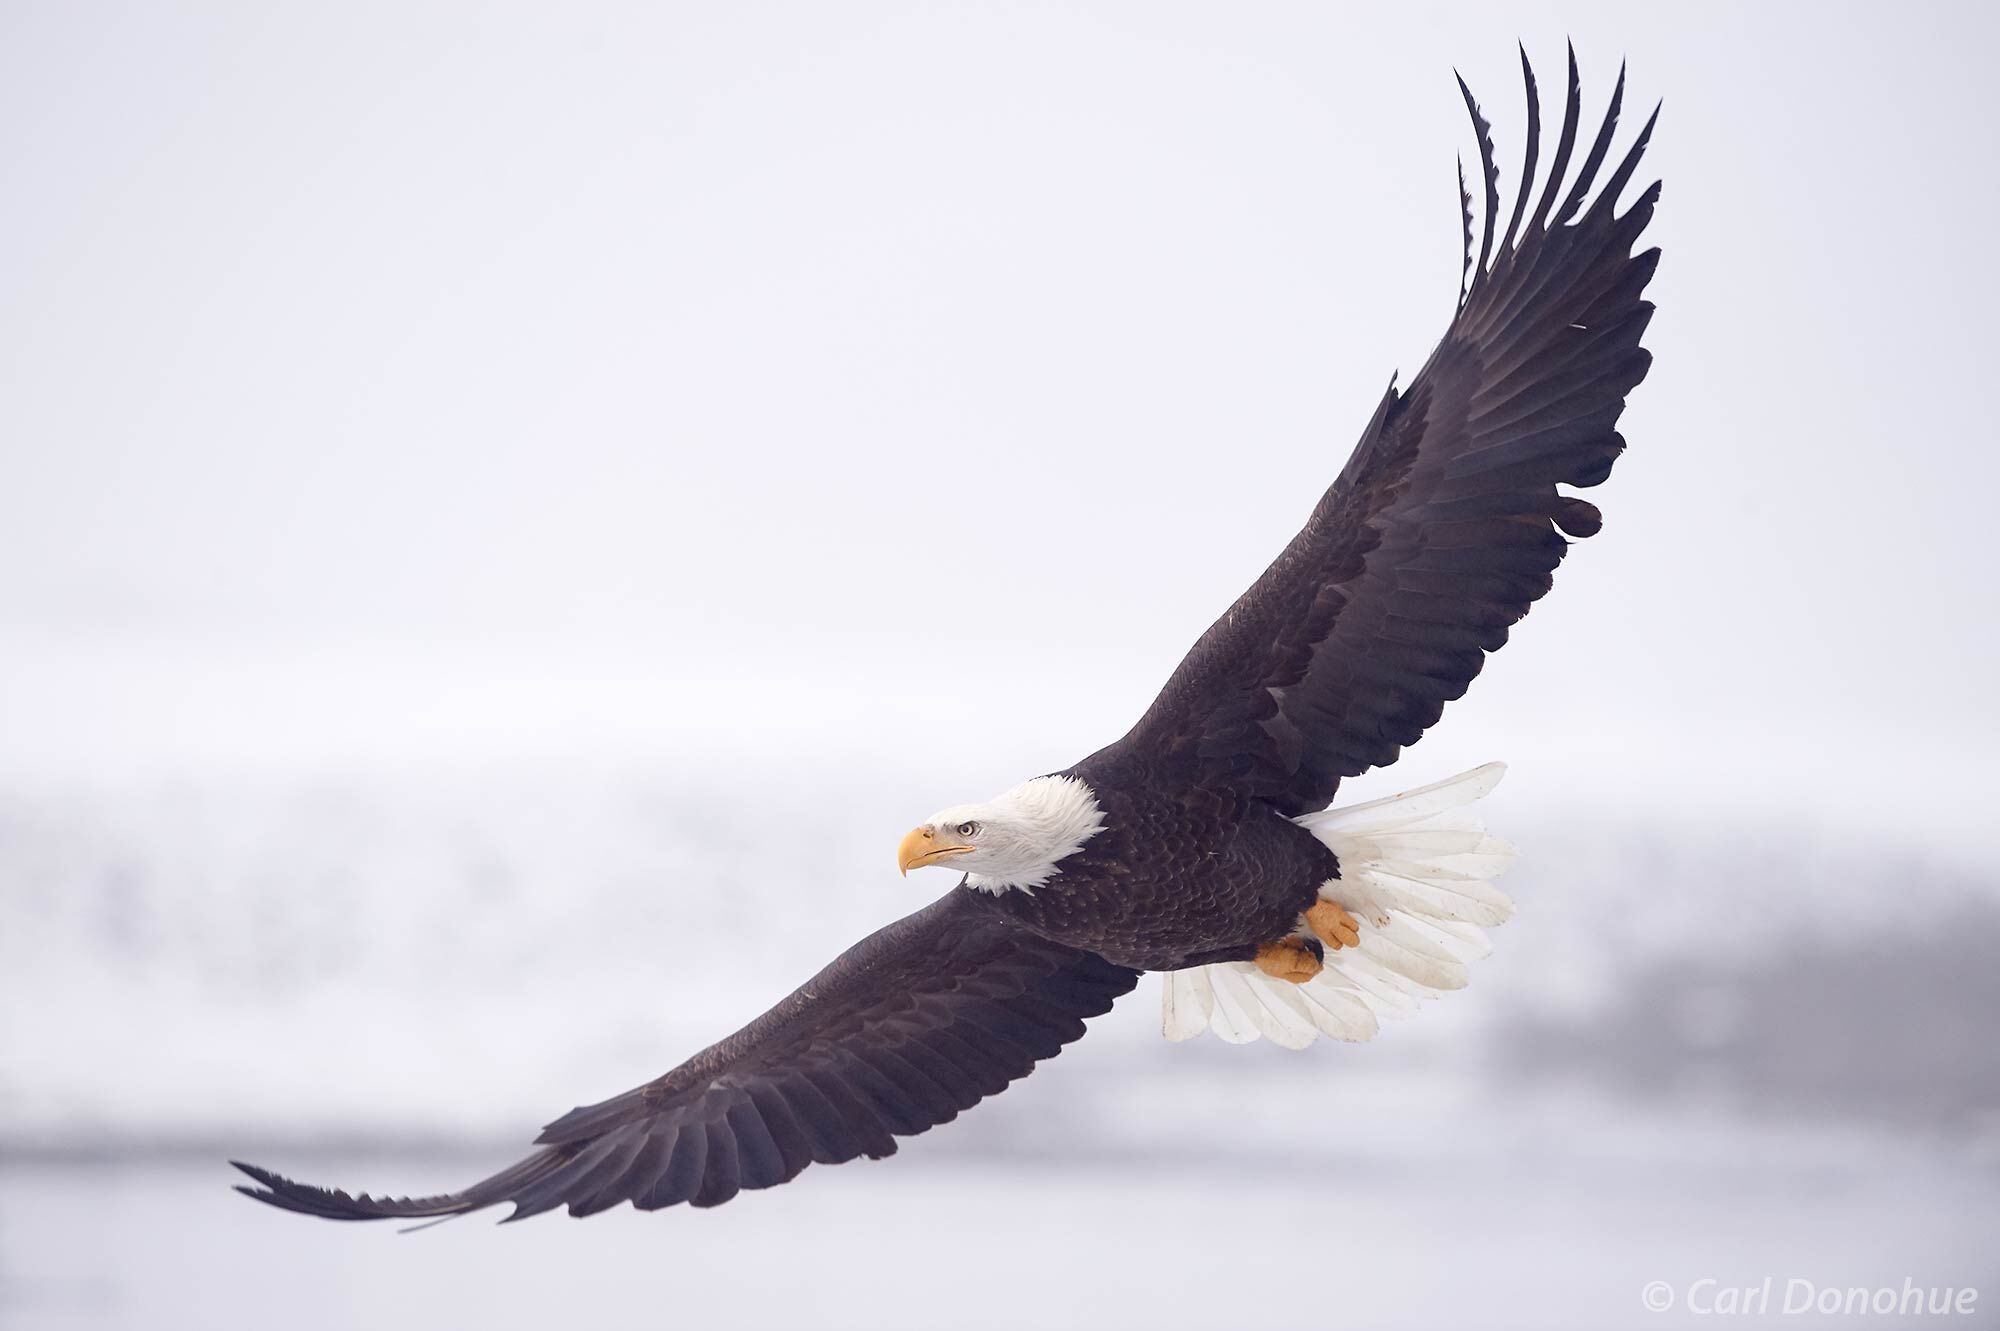 A beautiful mature bald eagle in full-flight, wings spread wide against a snowy background. What more can I ask for! Near Haines...